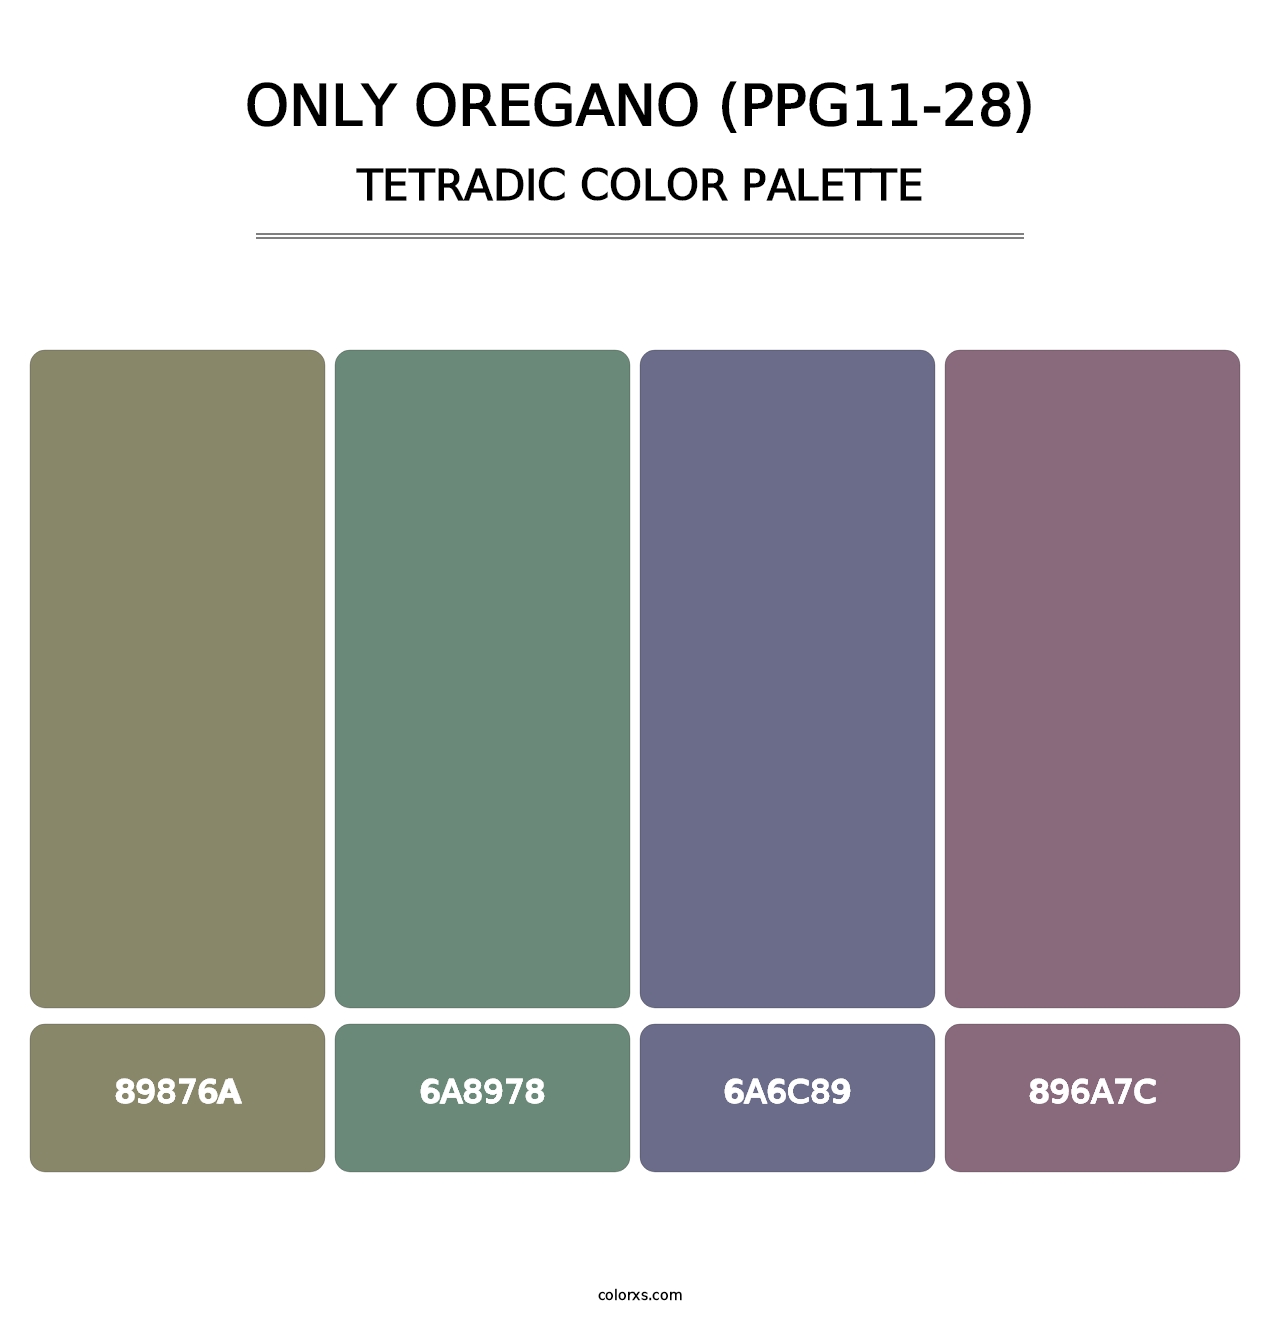 Only Oregano (PPG11-28) - Tetradic Color Palette